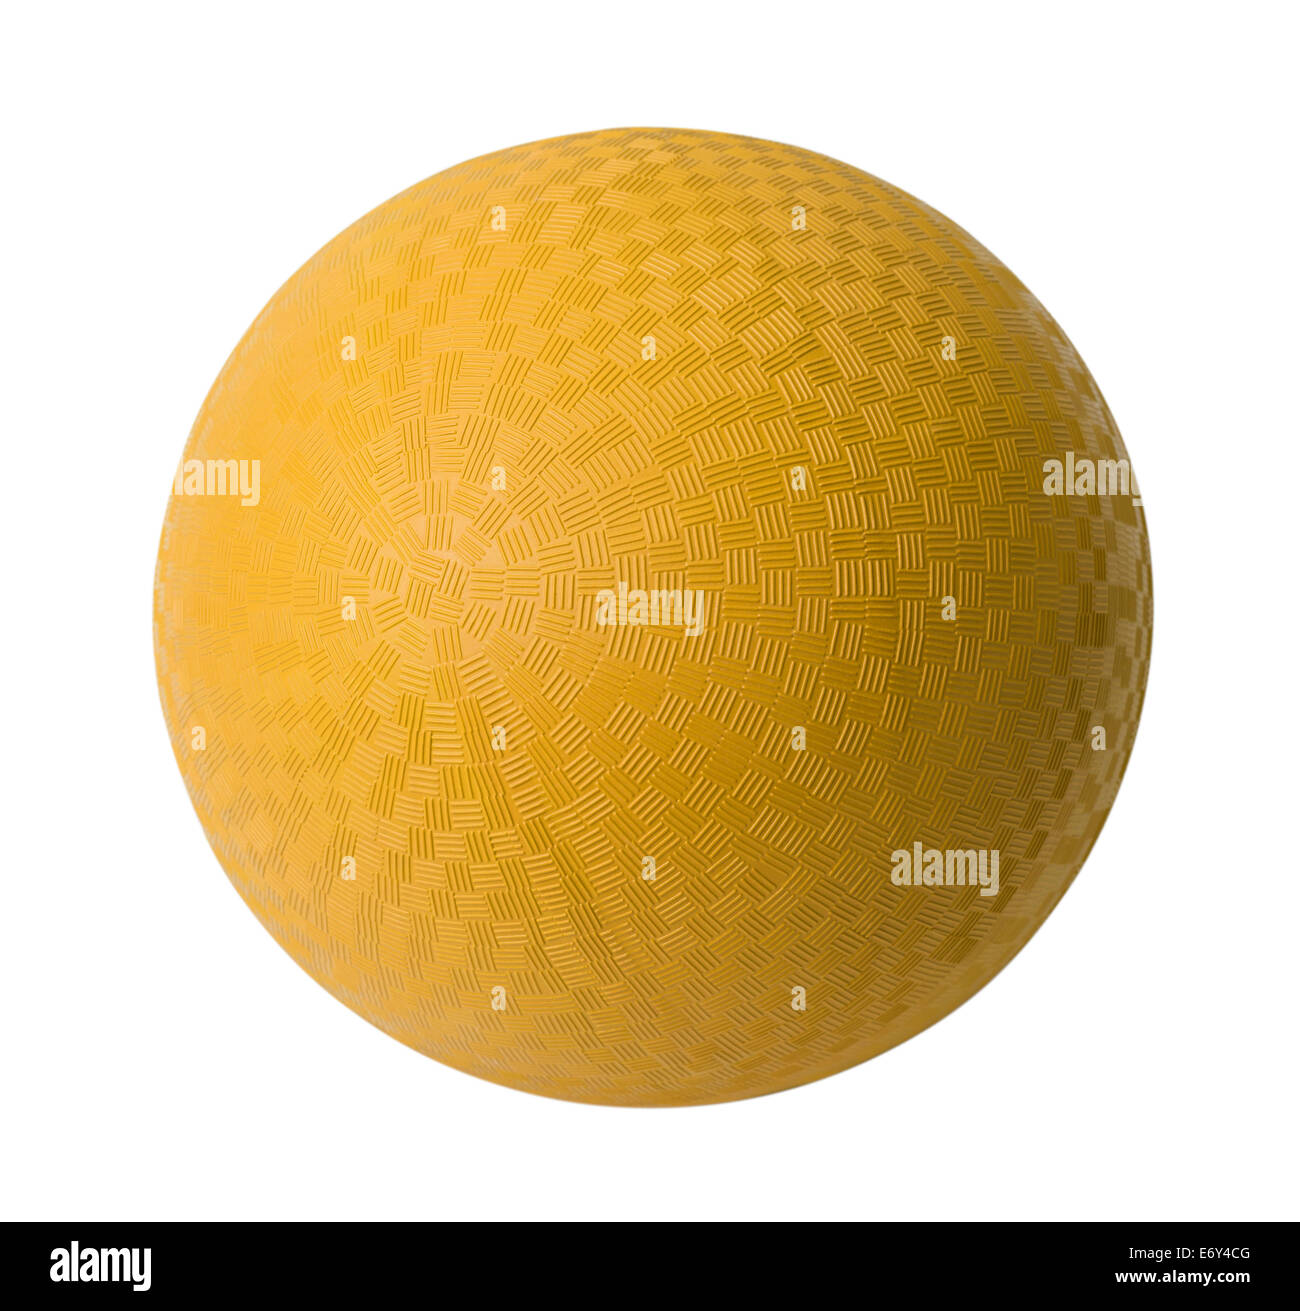 Yellow Rubber Ball Isolated on White Background. Stock Photo